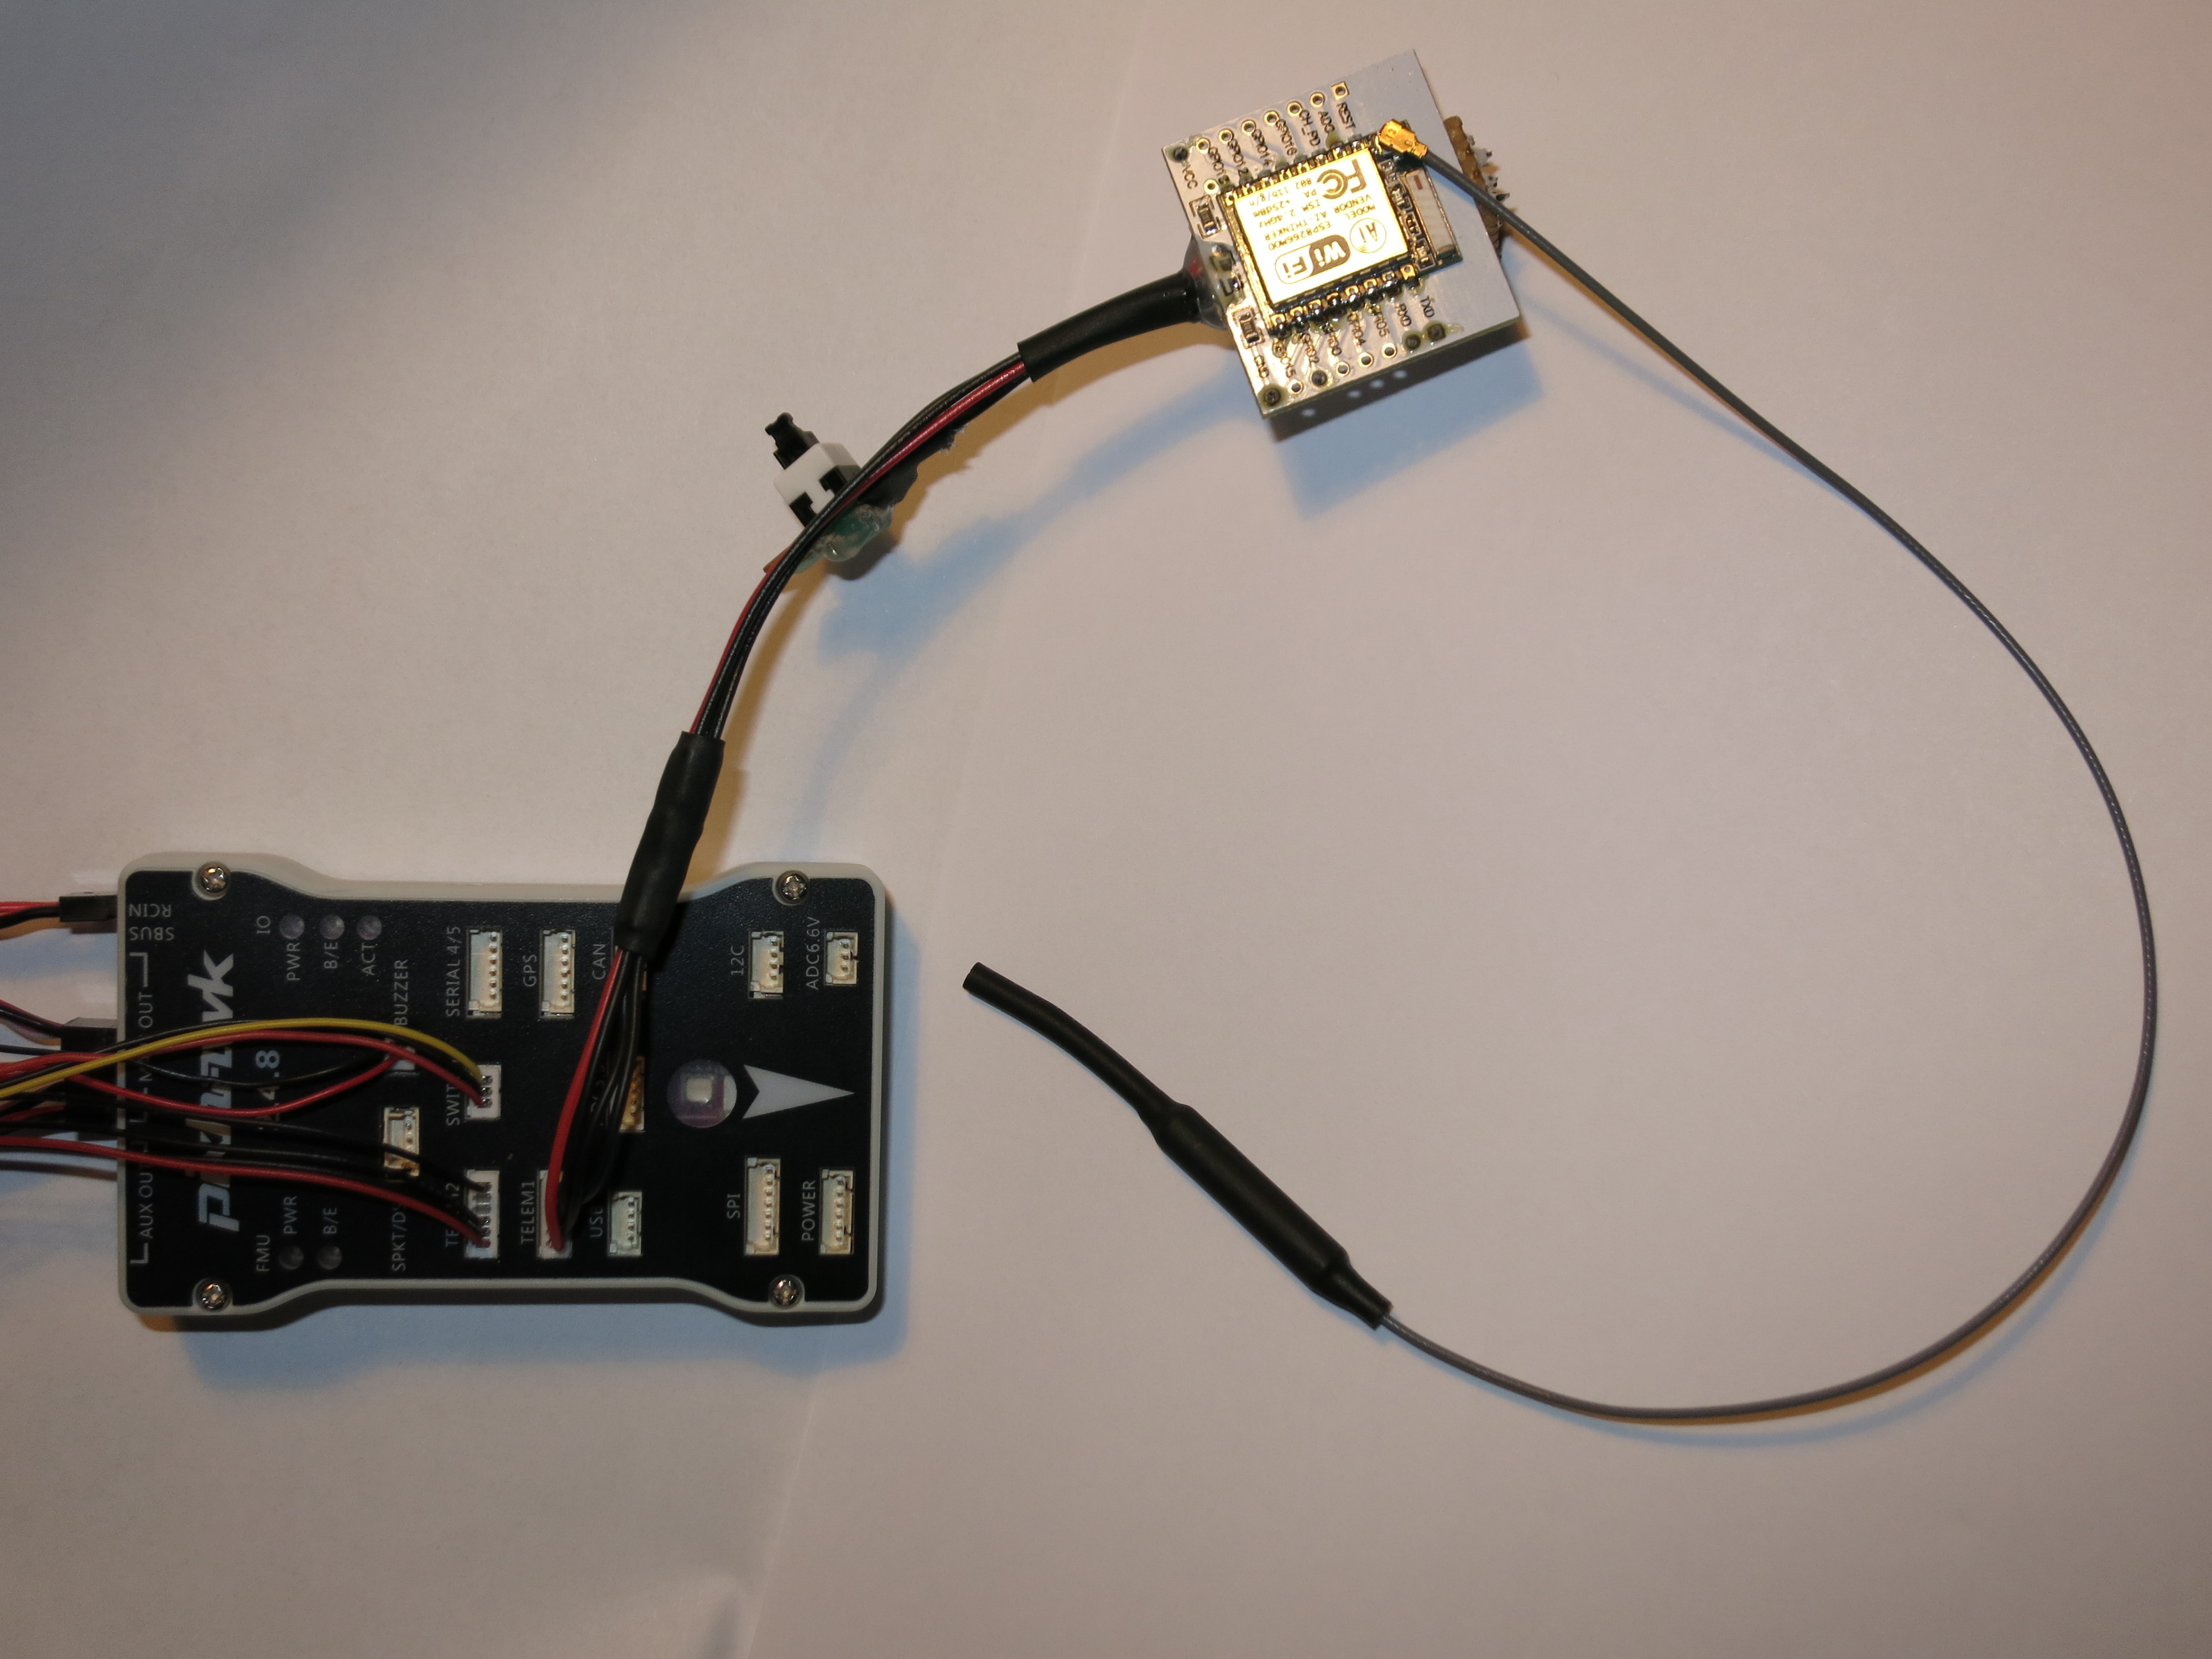 esp-07-wi-fi-telemetry-module-with-external-antenna-connected-to-pixhawk